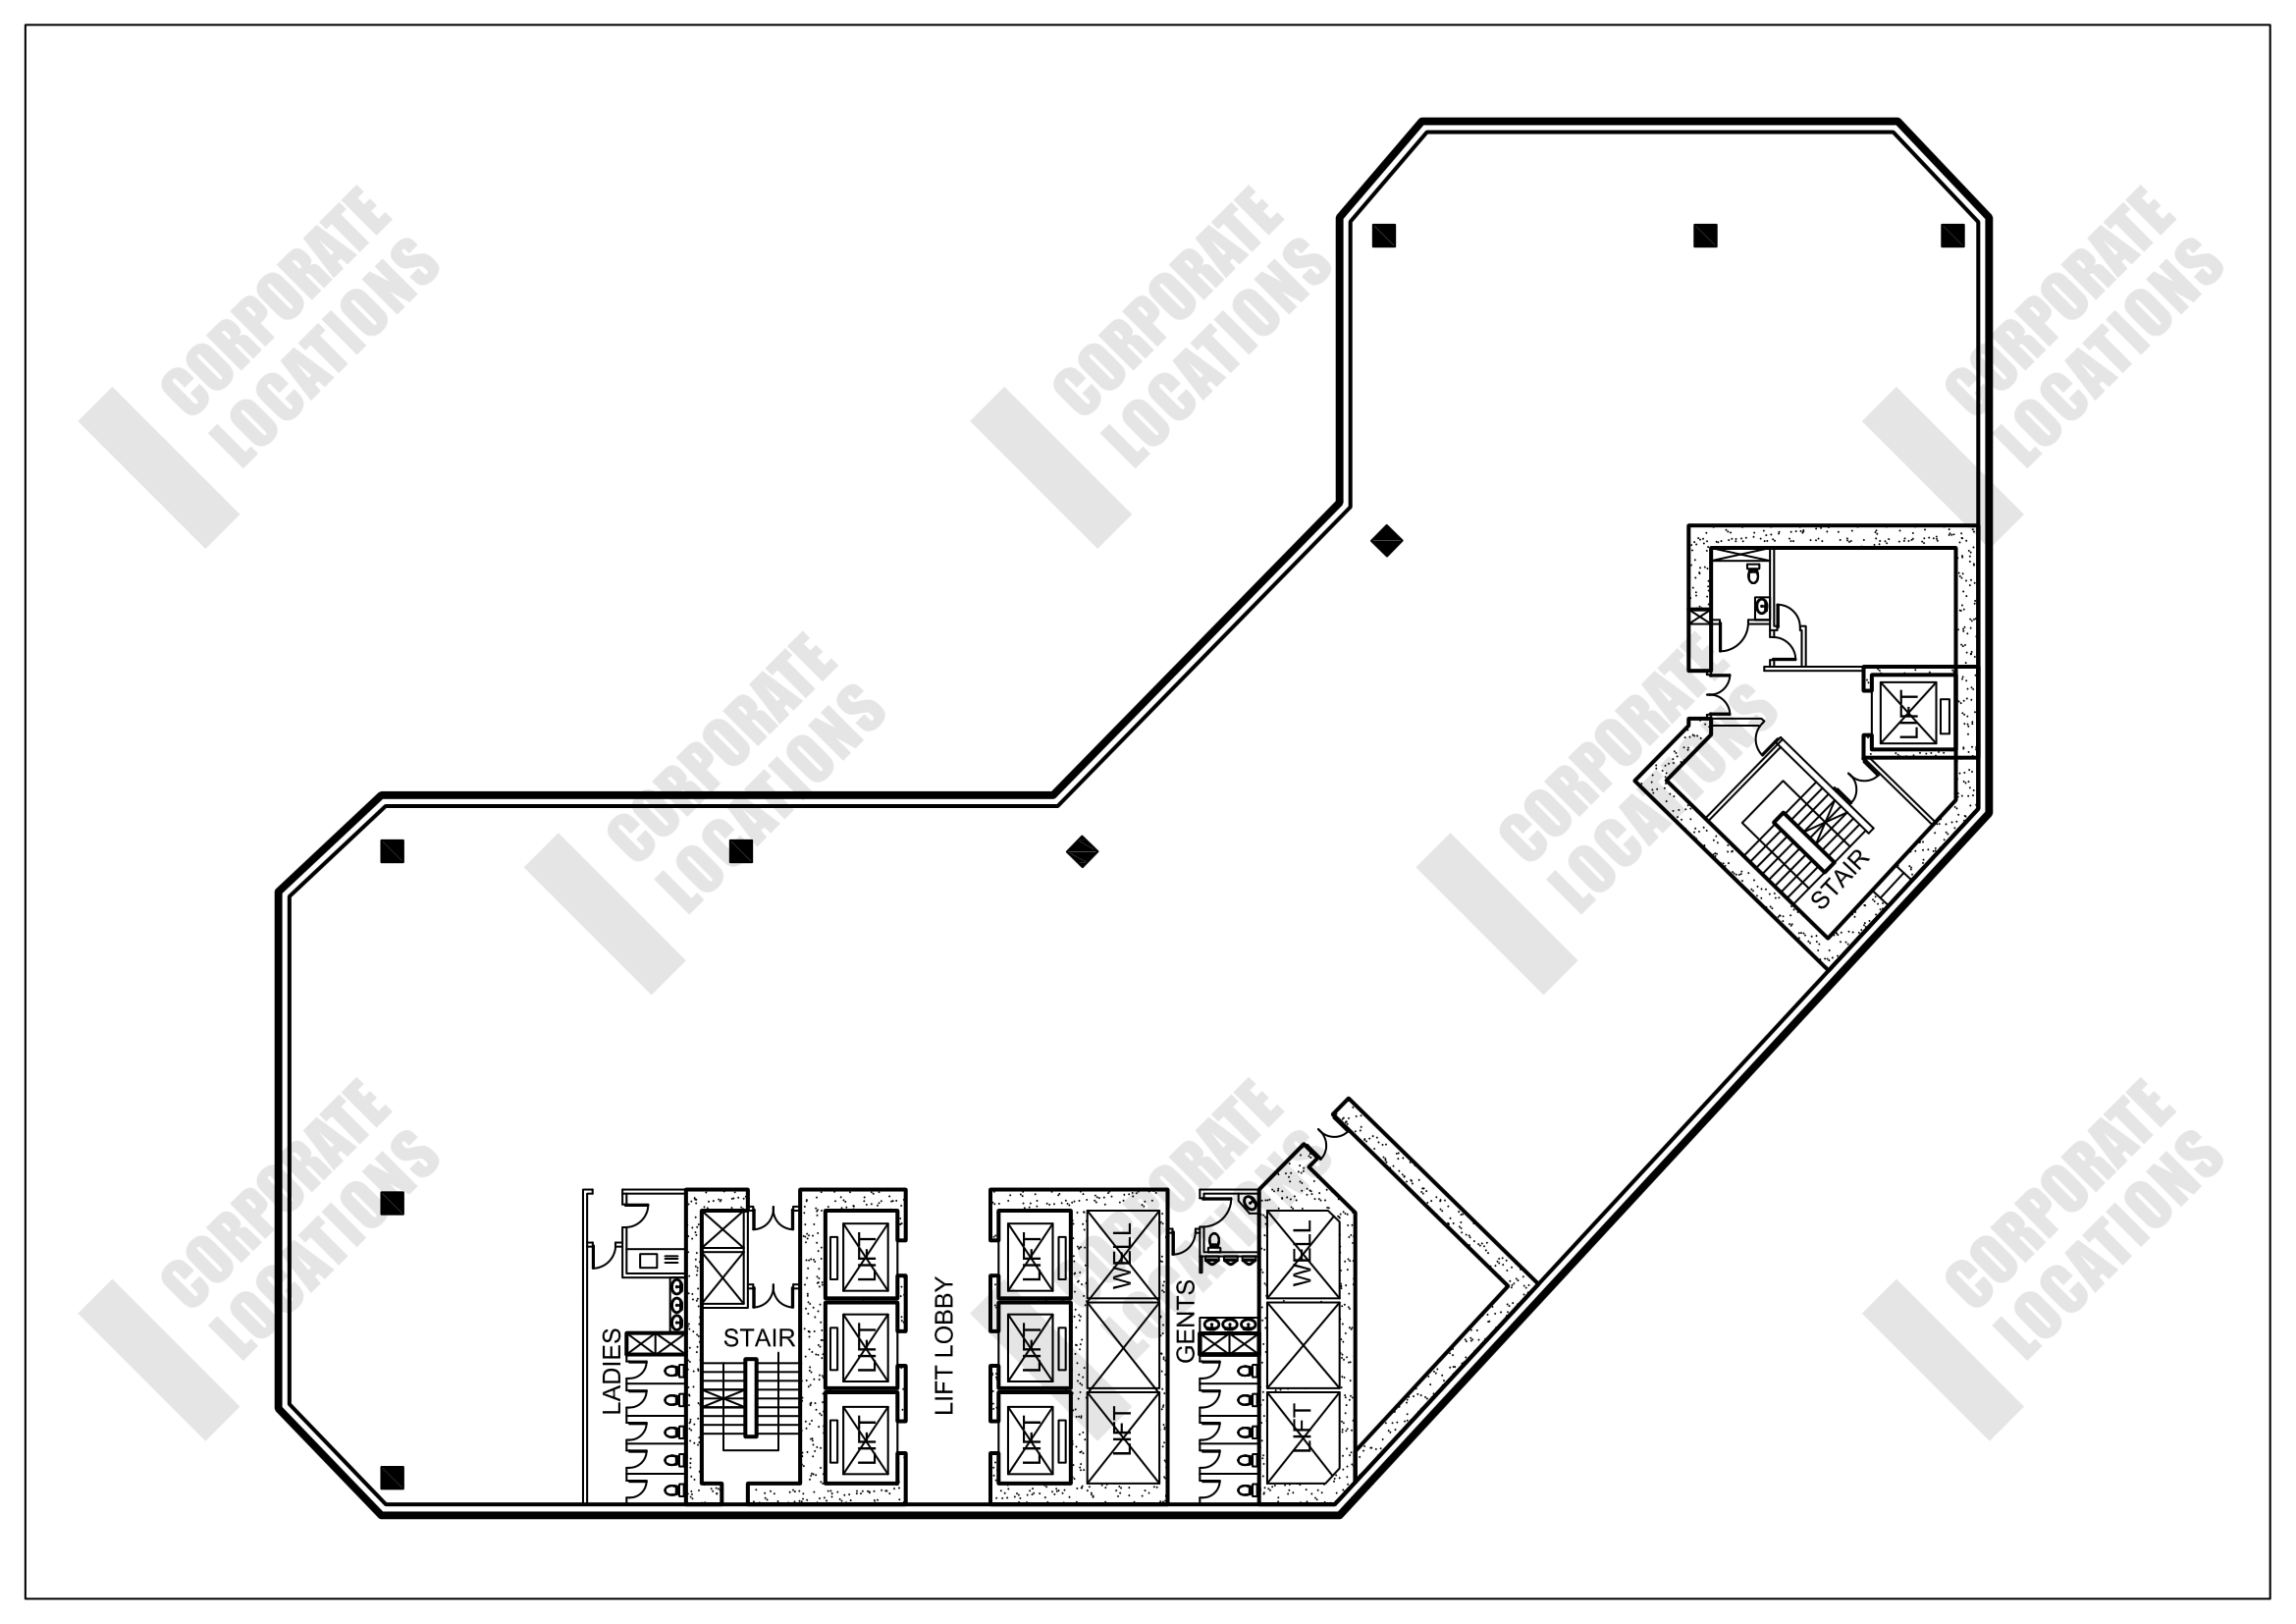 Floorplan Times Square, Tower One